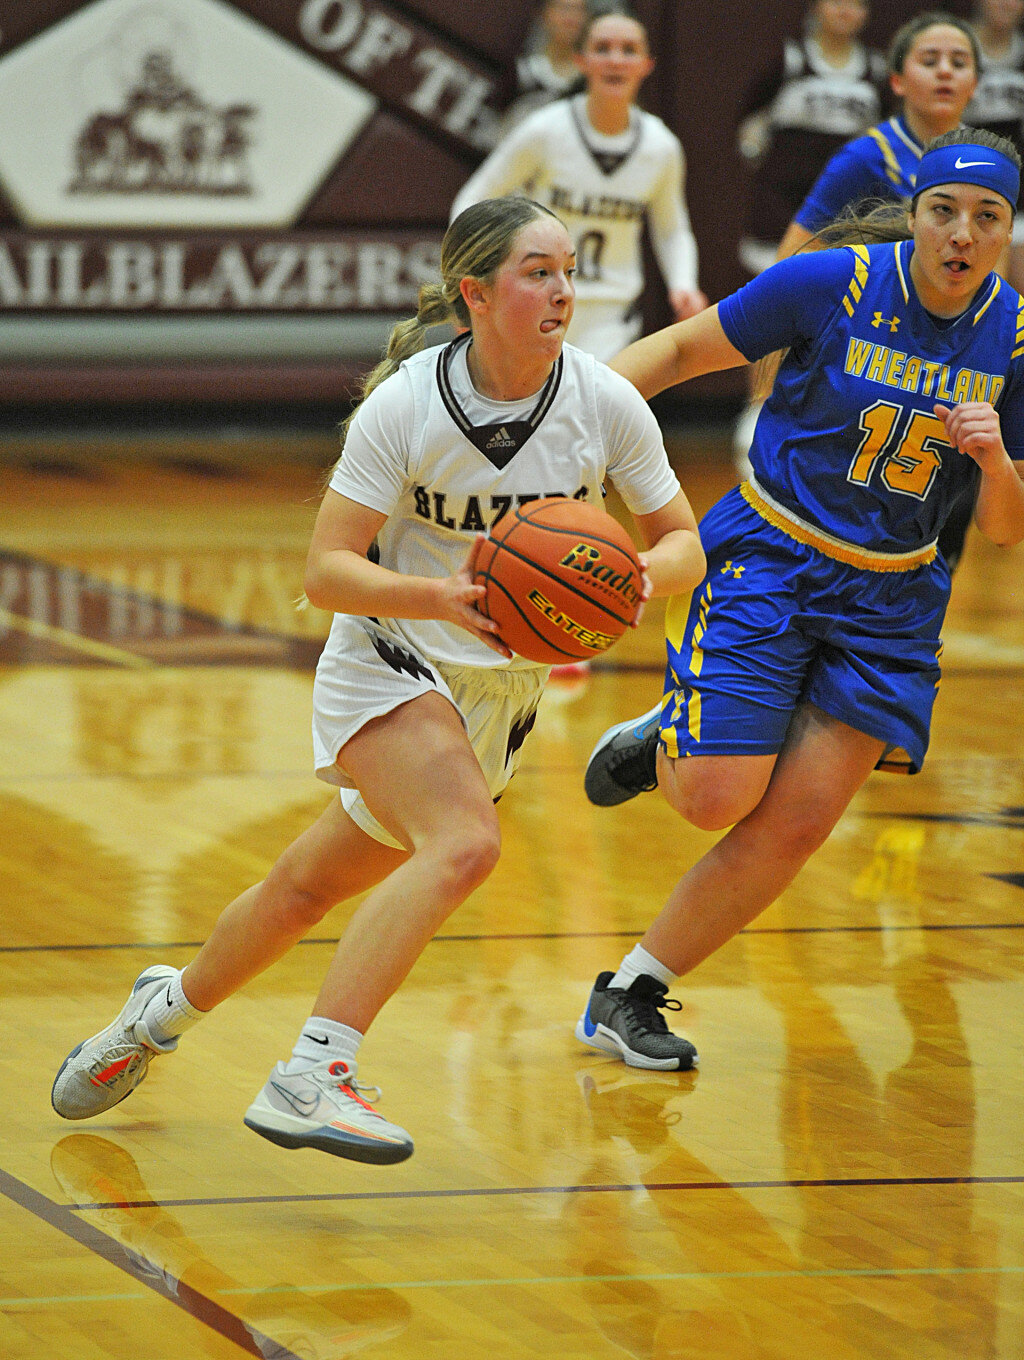 robert galbreath/torrington telegram
Sophomore Natalie Long, pictured on January 19, contributed seven points to the Lady Blazers’ tally against Buffalo.